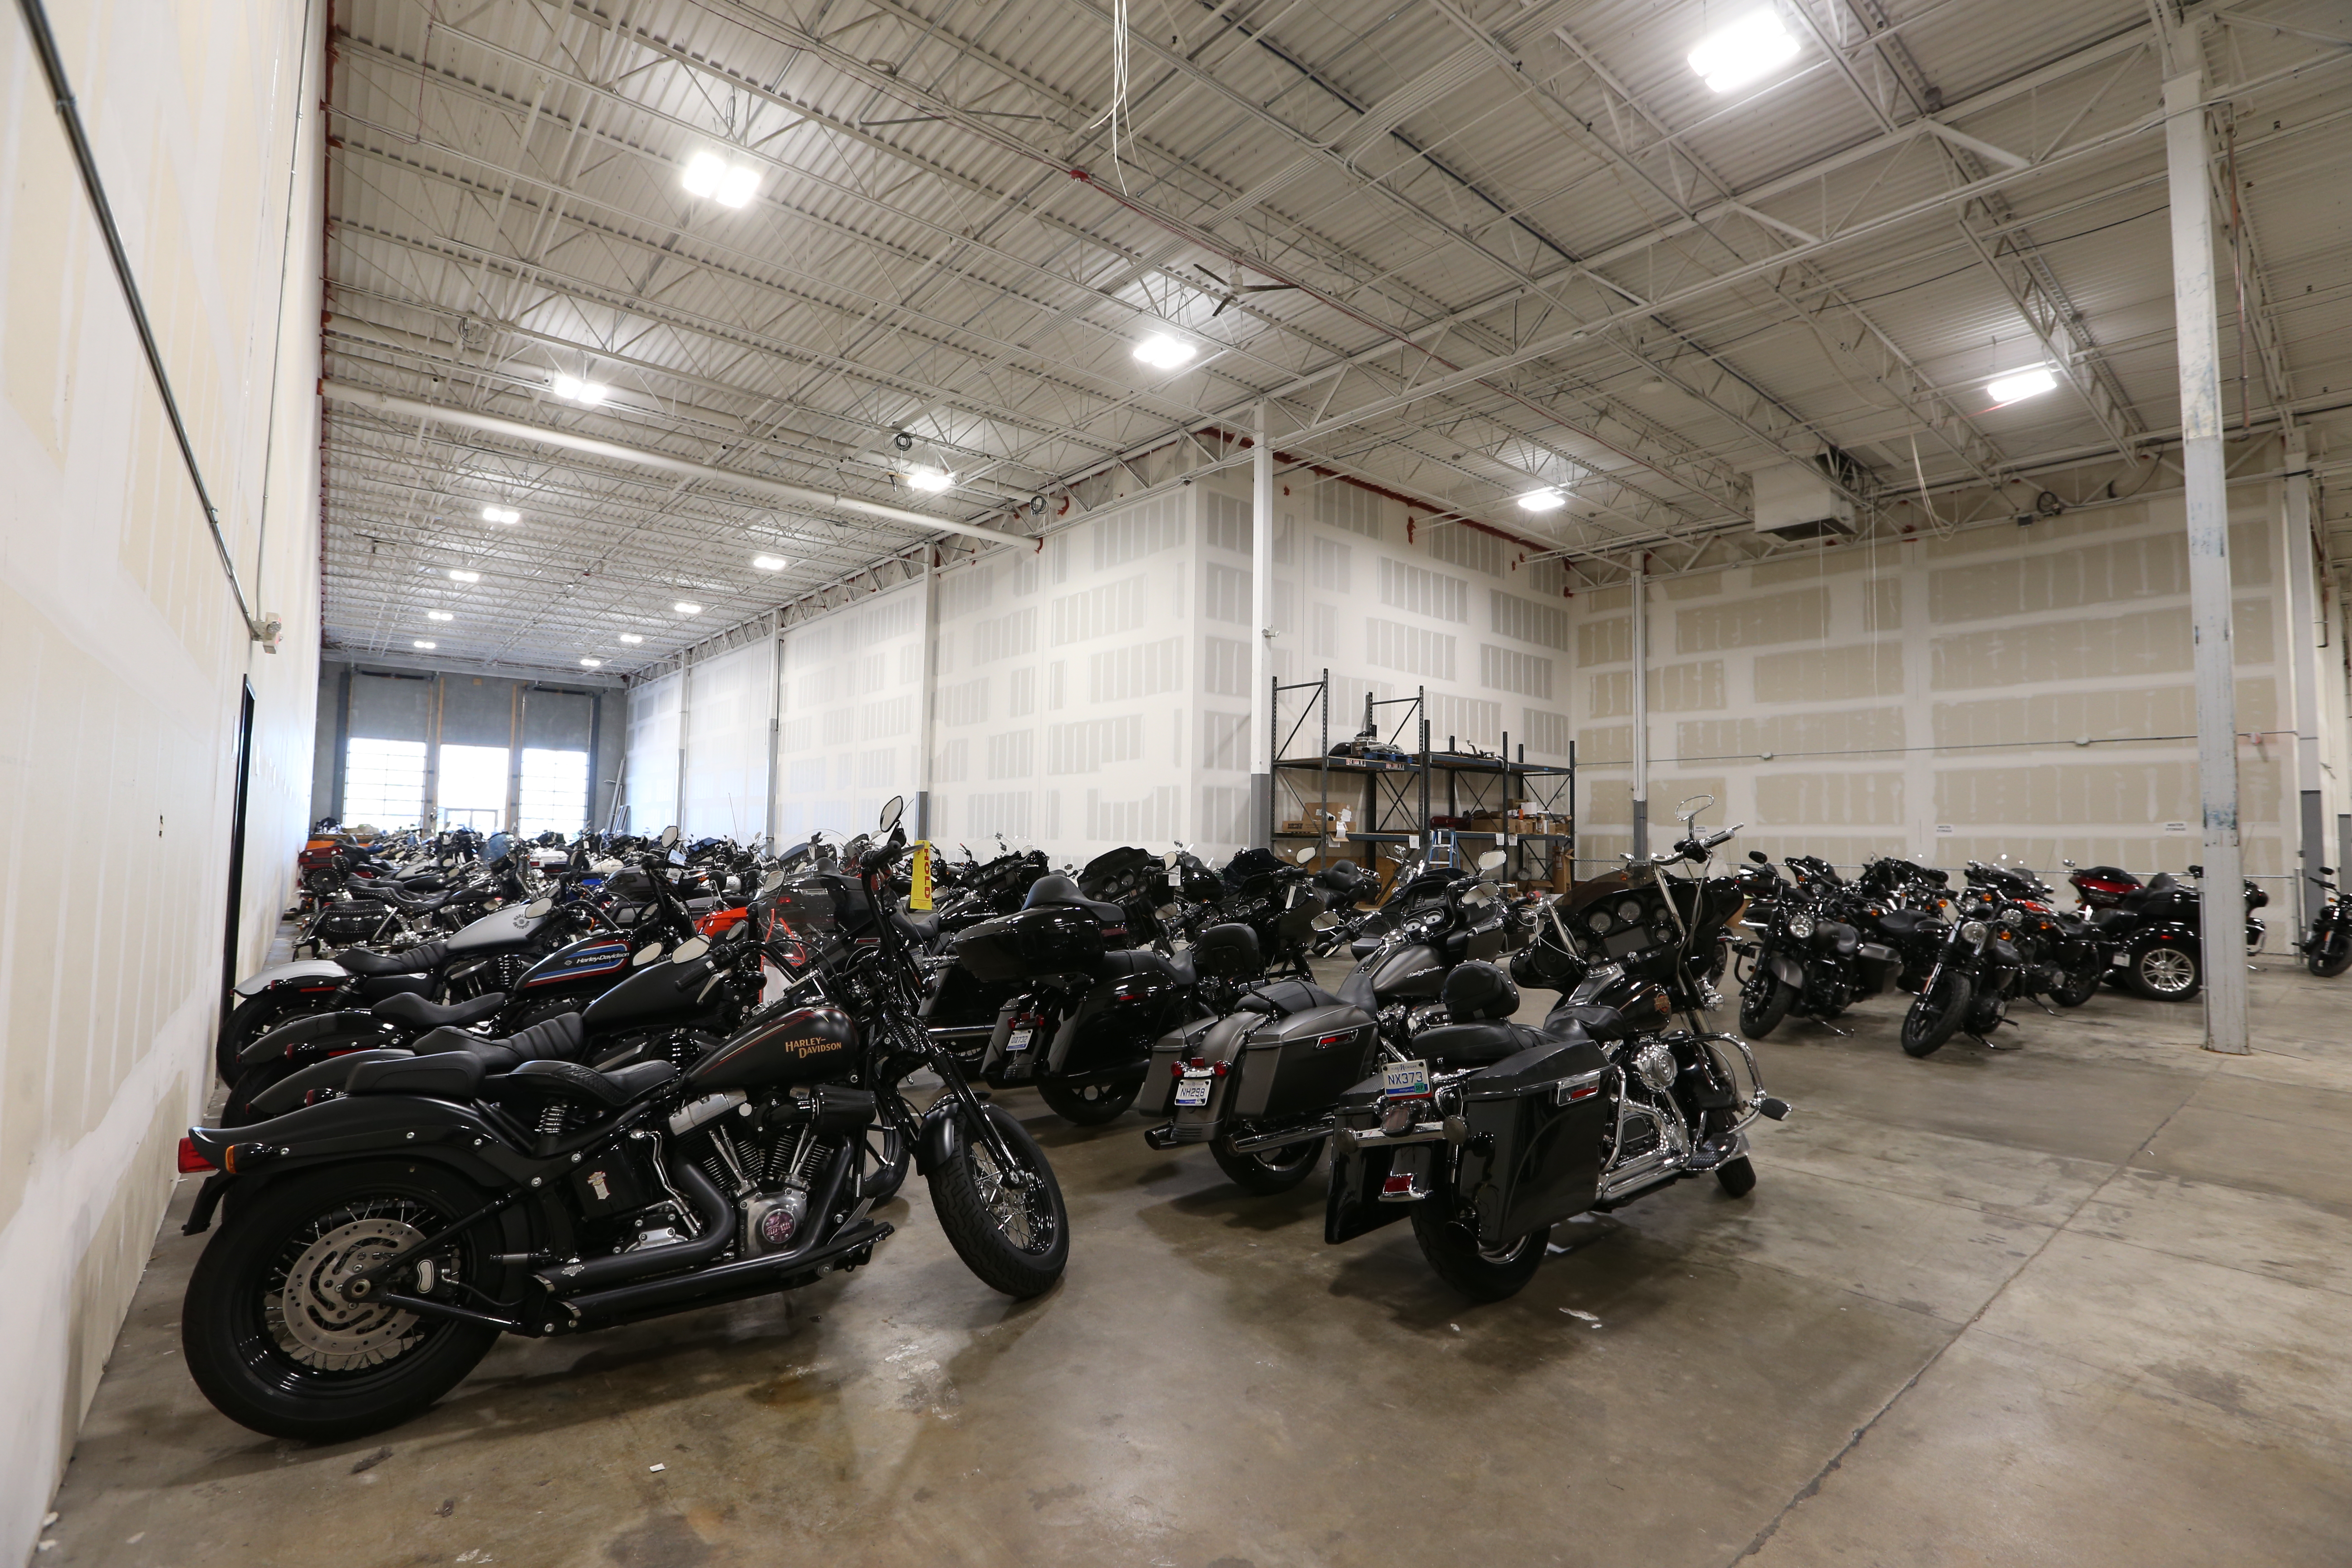 Electro-Matic Works with Harley Davidson on Second LED Lighting Project